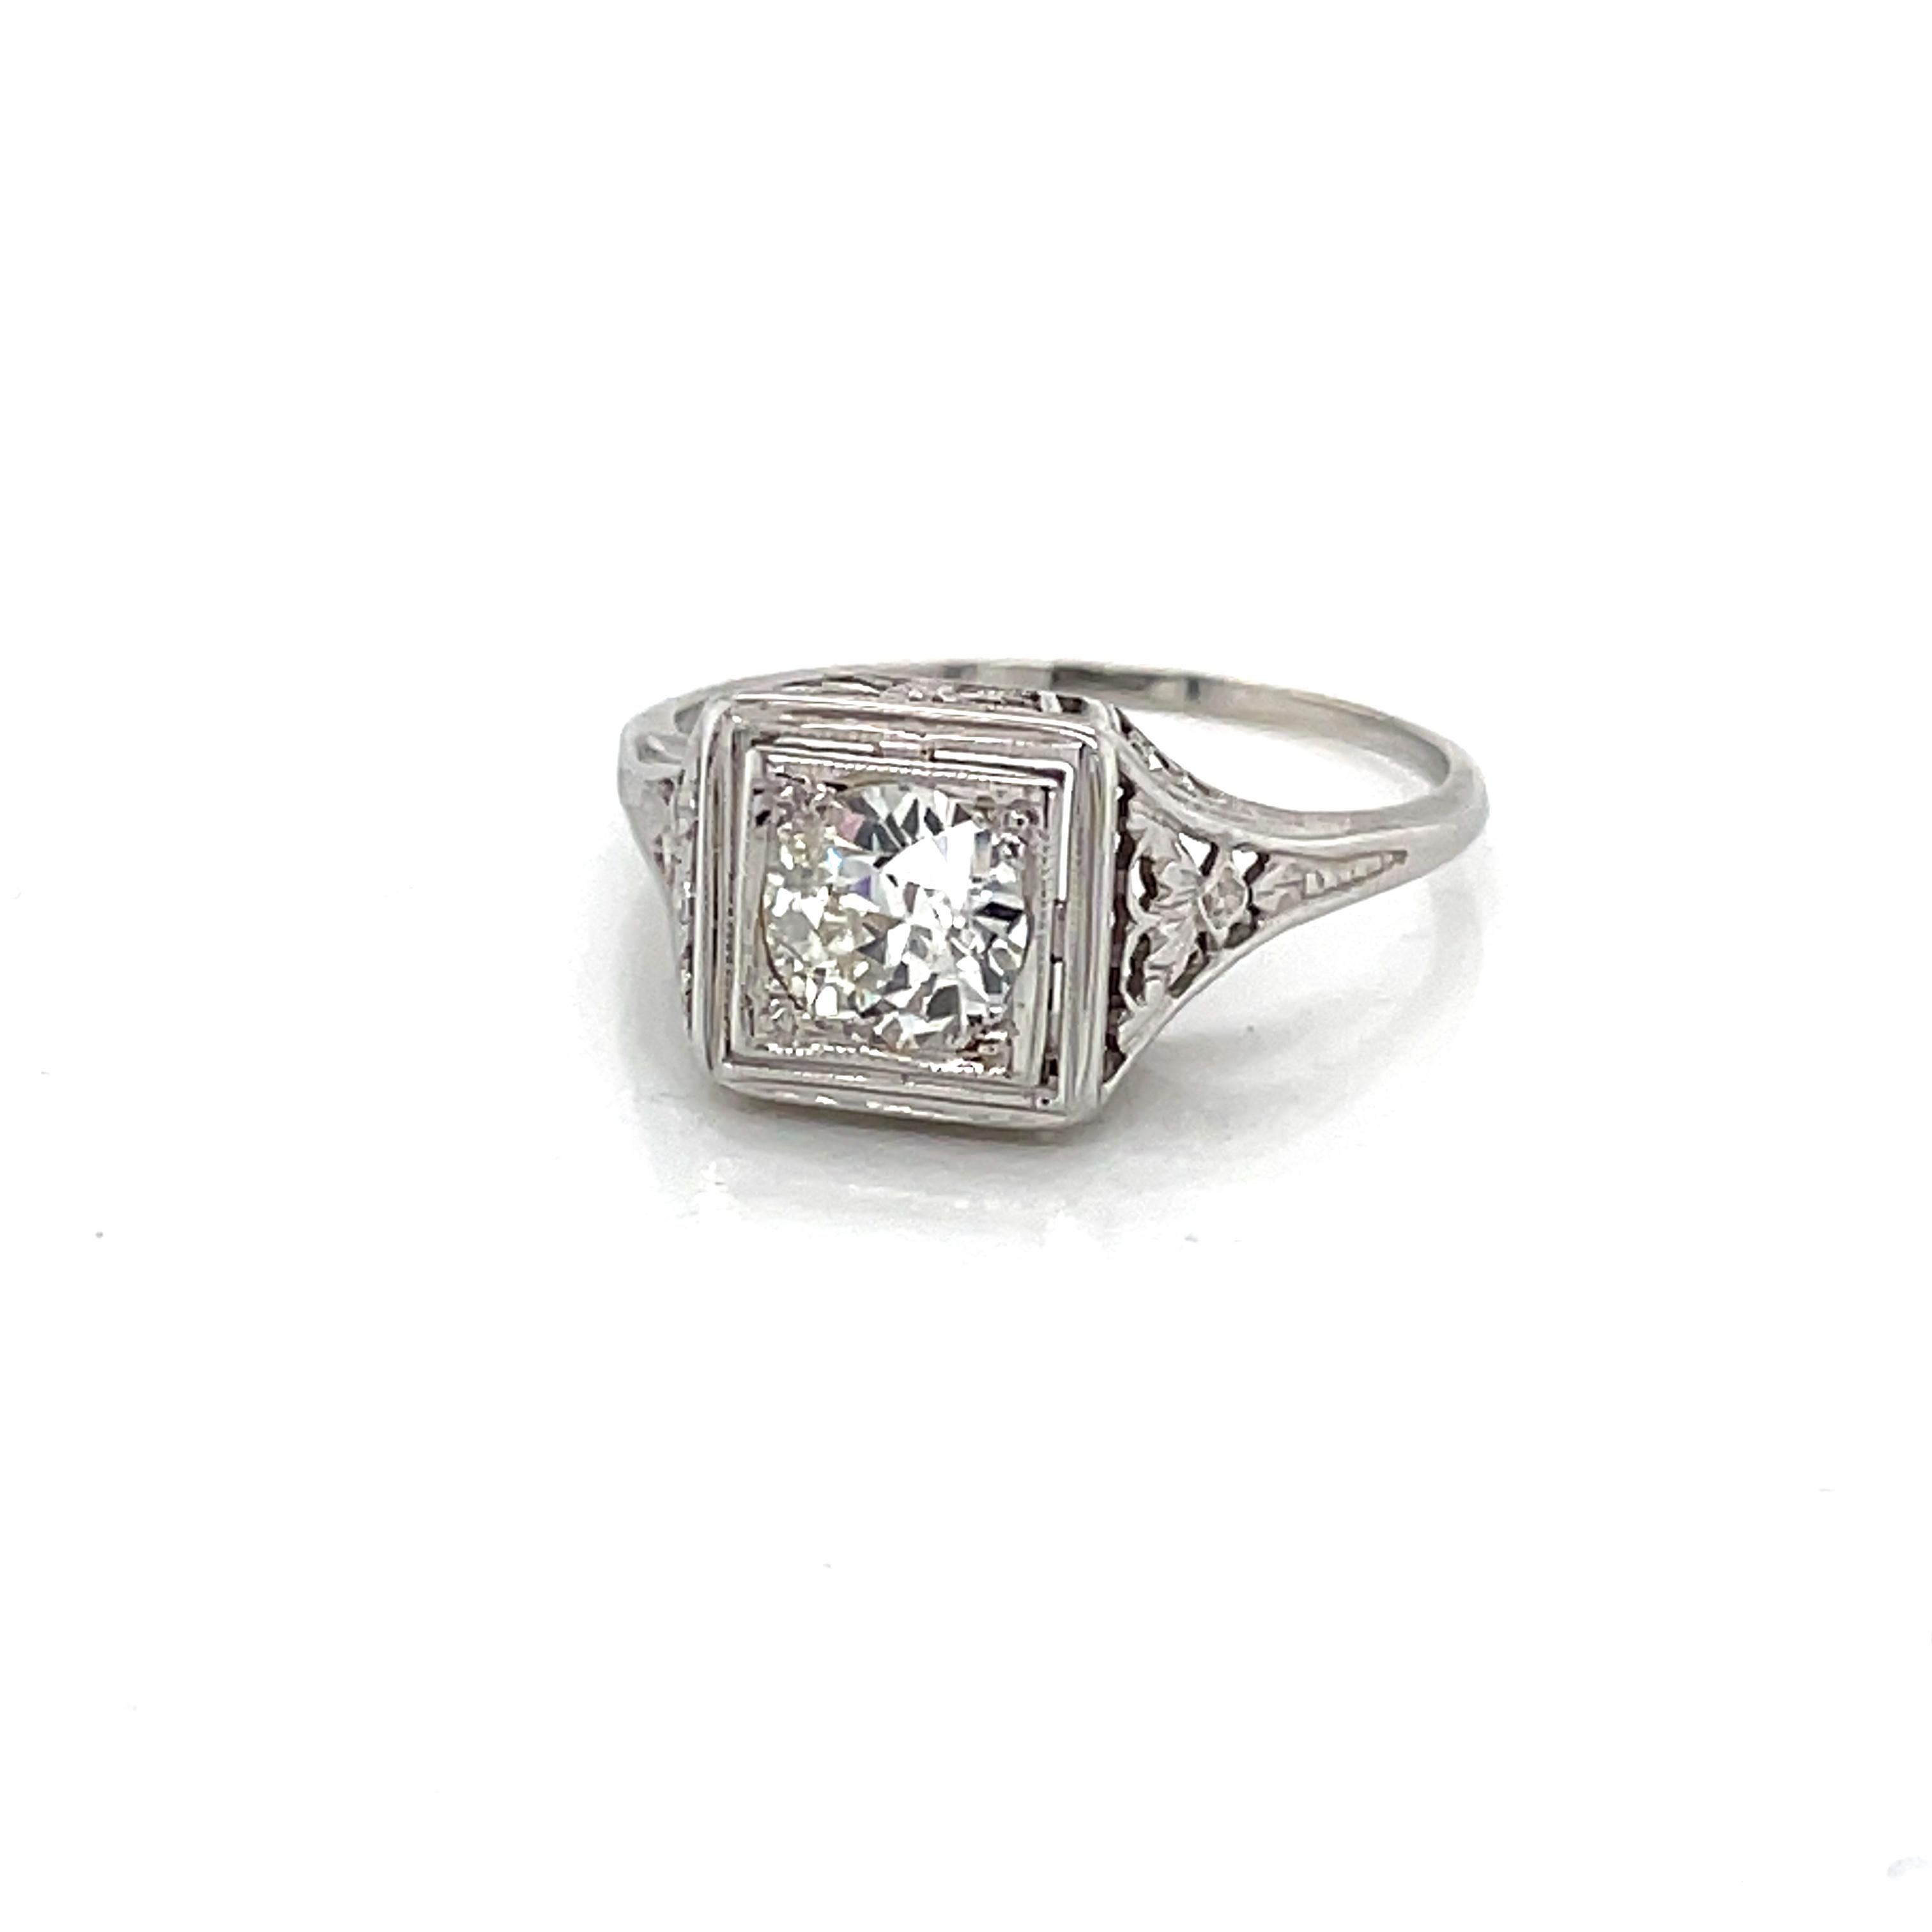 Squarely framed in a beautiful raised gallery of fine eighteen karat 18K white gold filigree is one sparkling .70 carat round H/VS Miner's cut diamond. The head of the romantic antique ring measures approximately 9x9mm and presents approximately